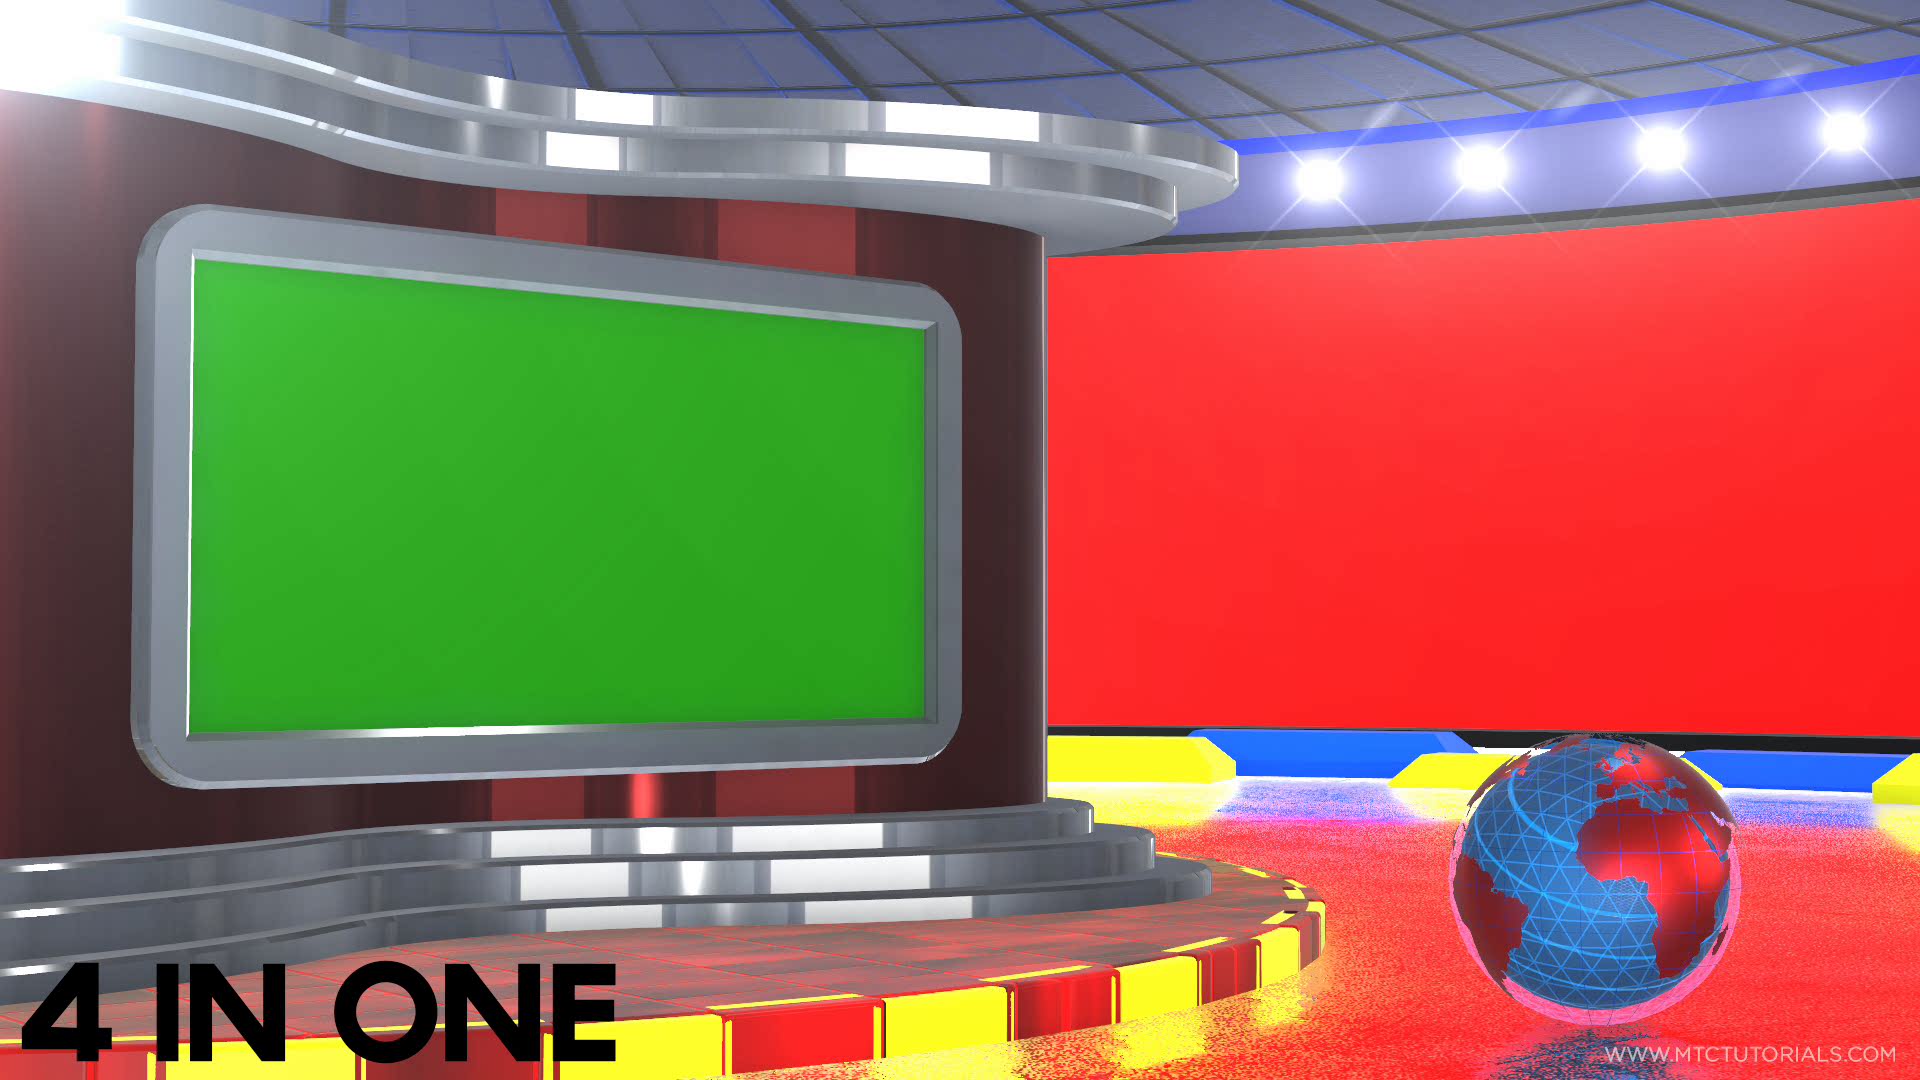 Royalty Green Screen News Studio High quality Videos & images